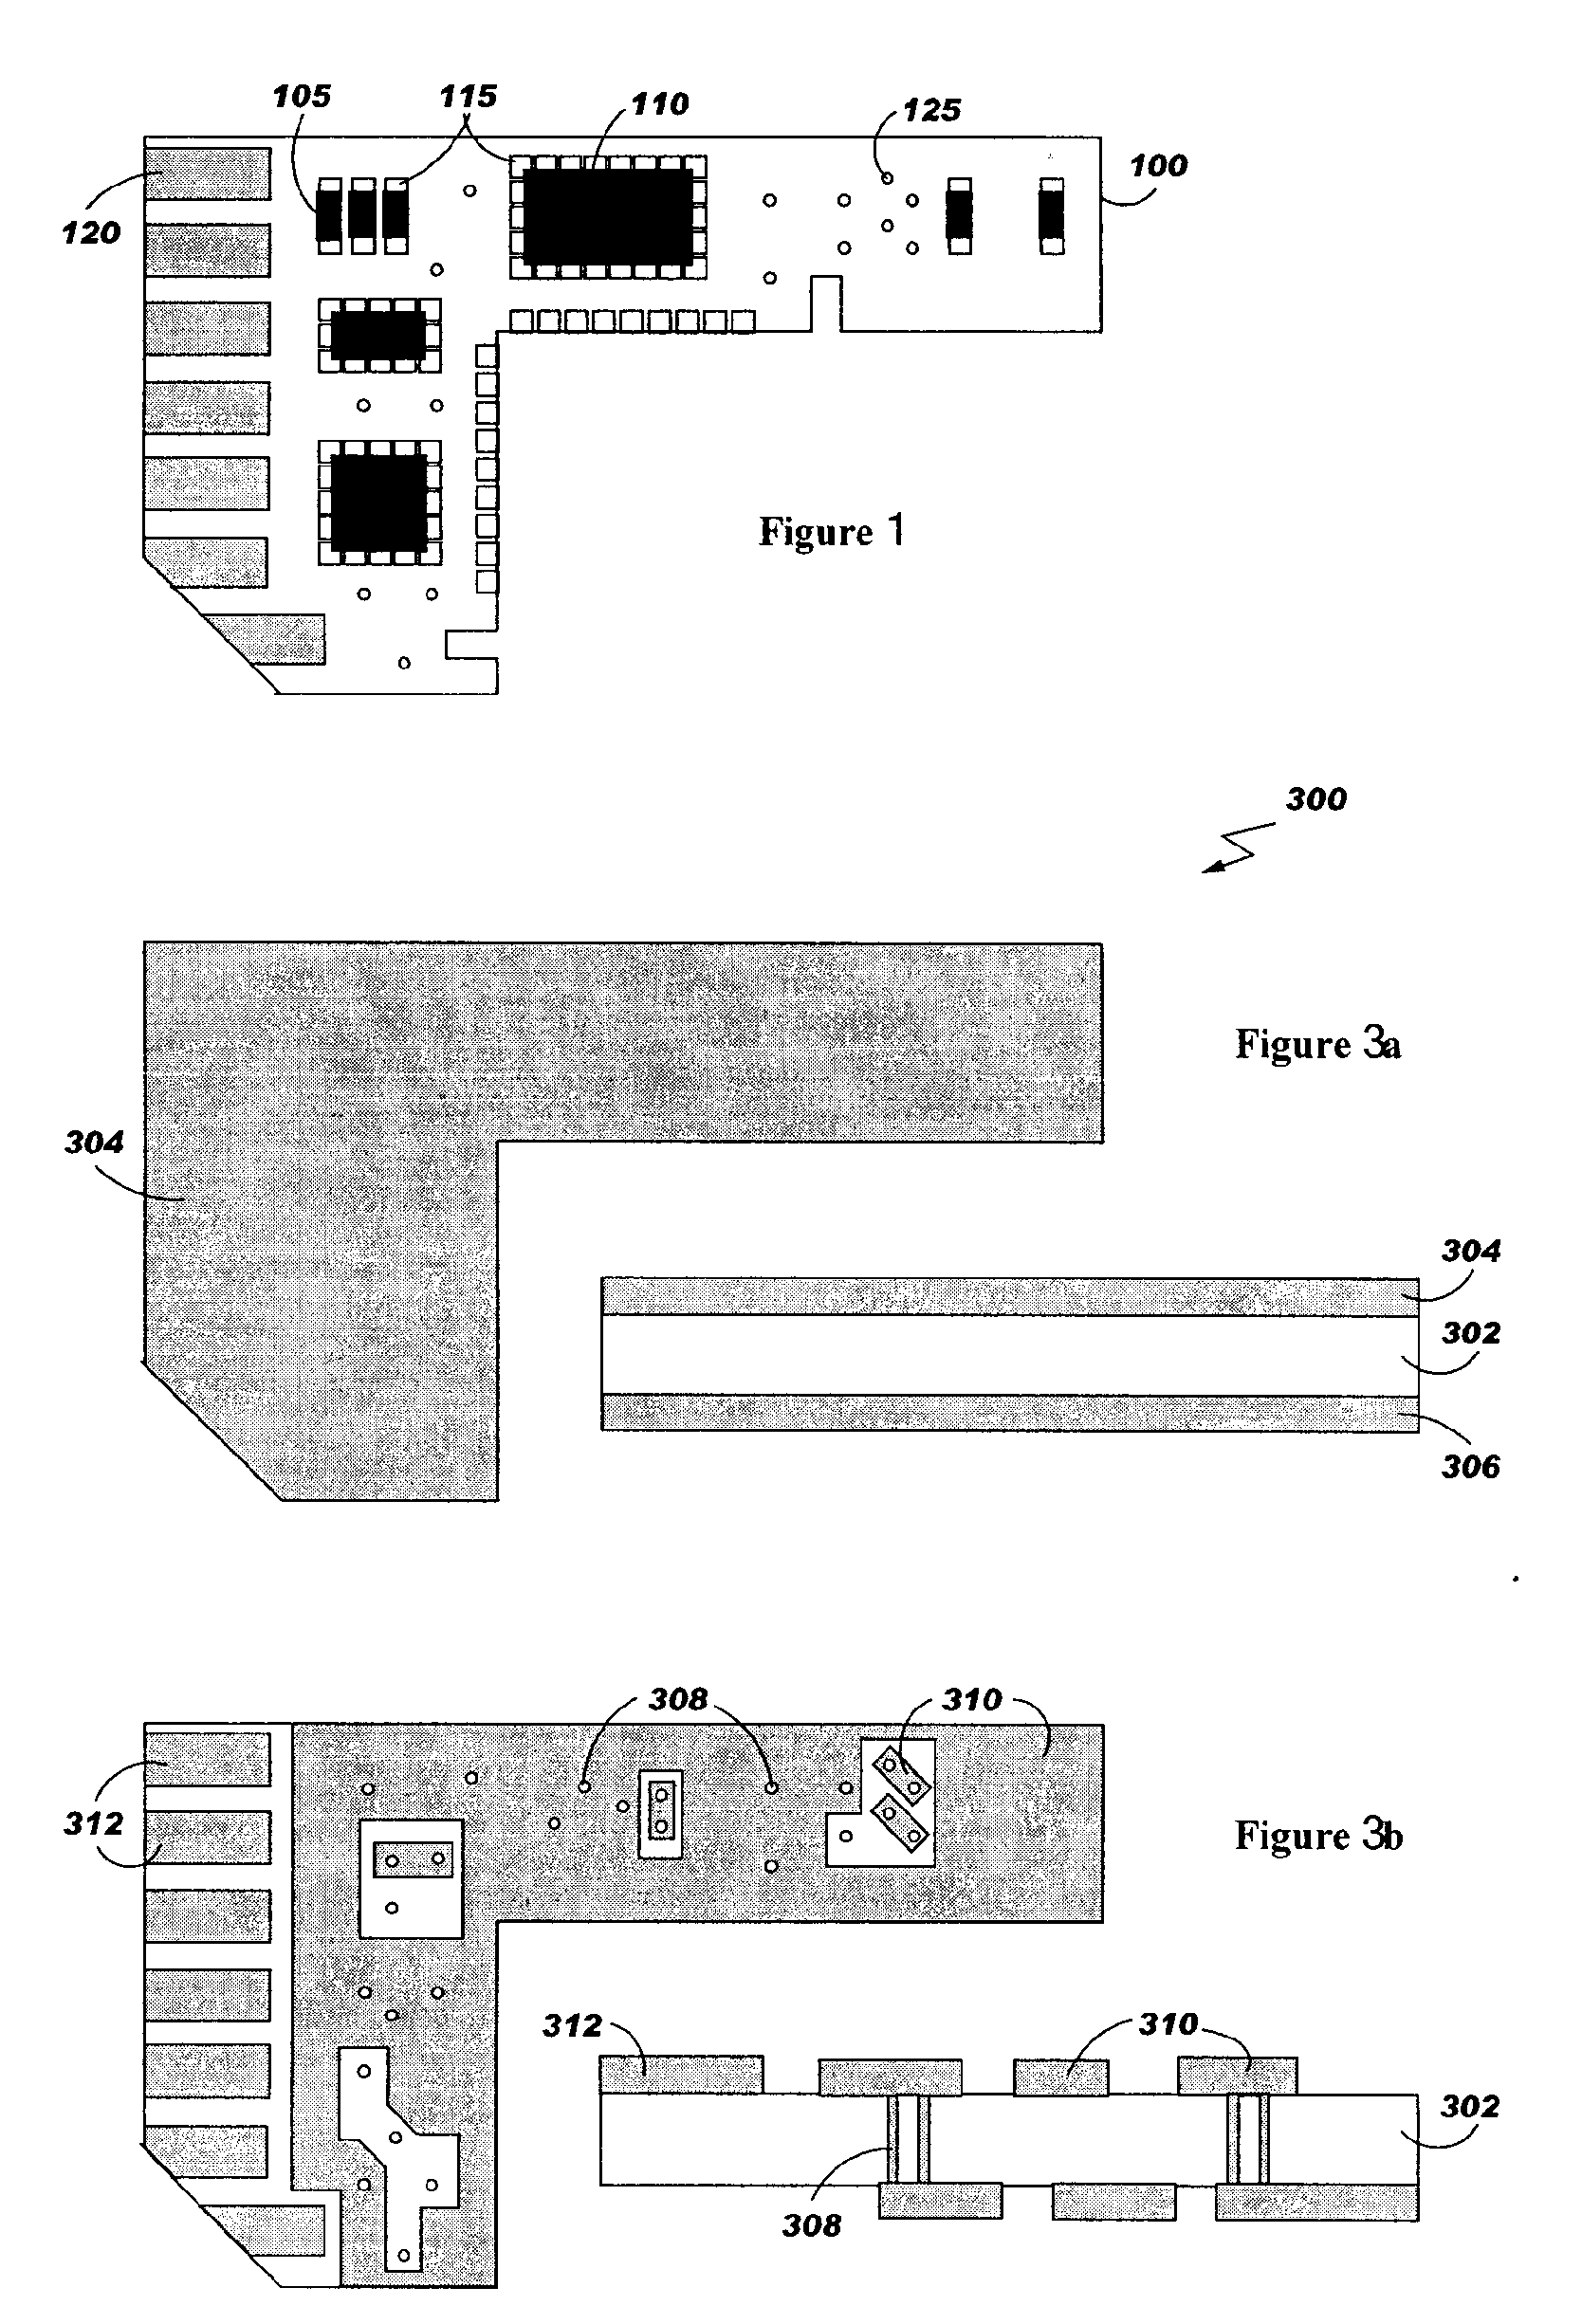 Optimized plating process for multilayer printed circuit boards having edge connectors